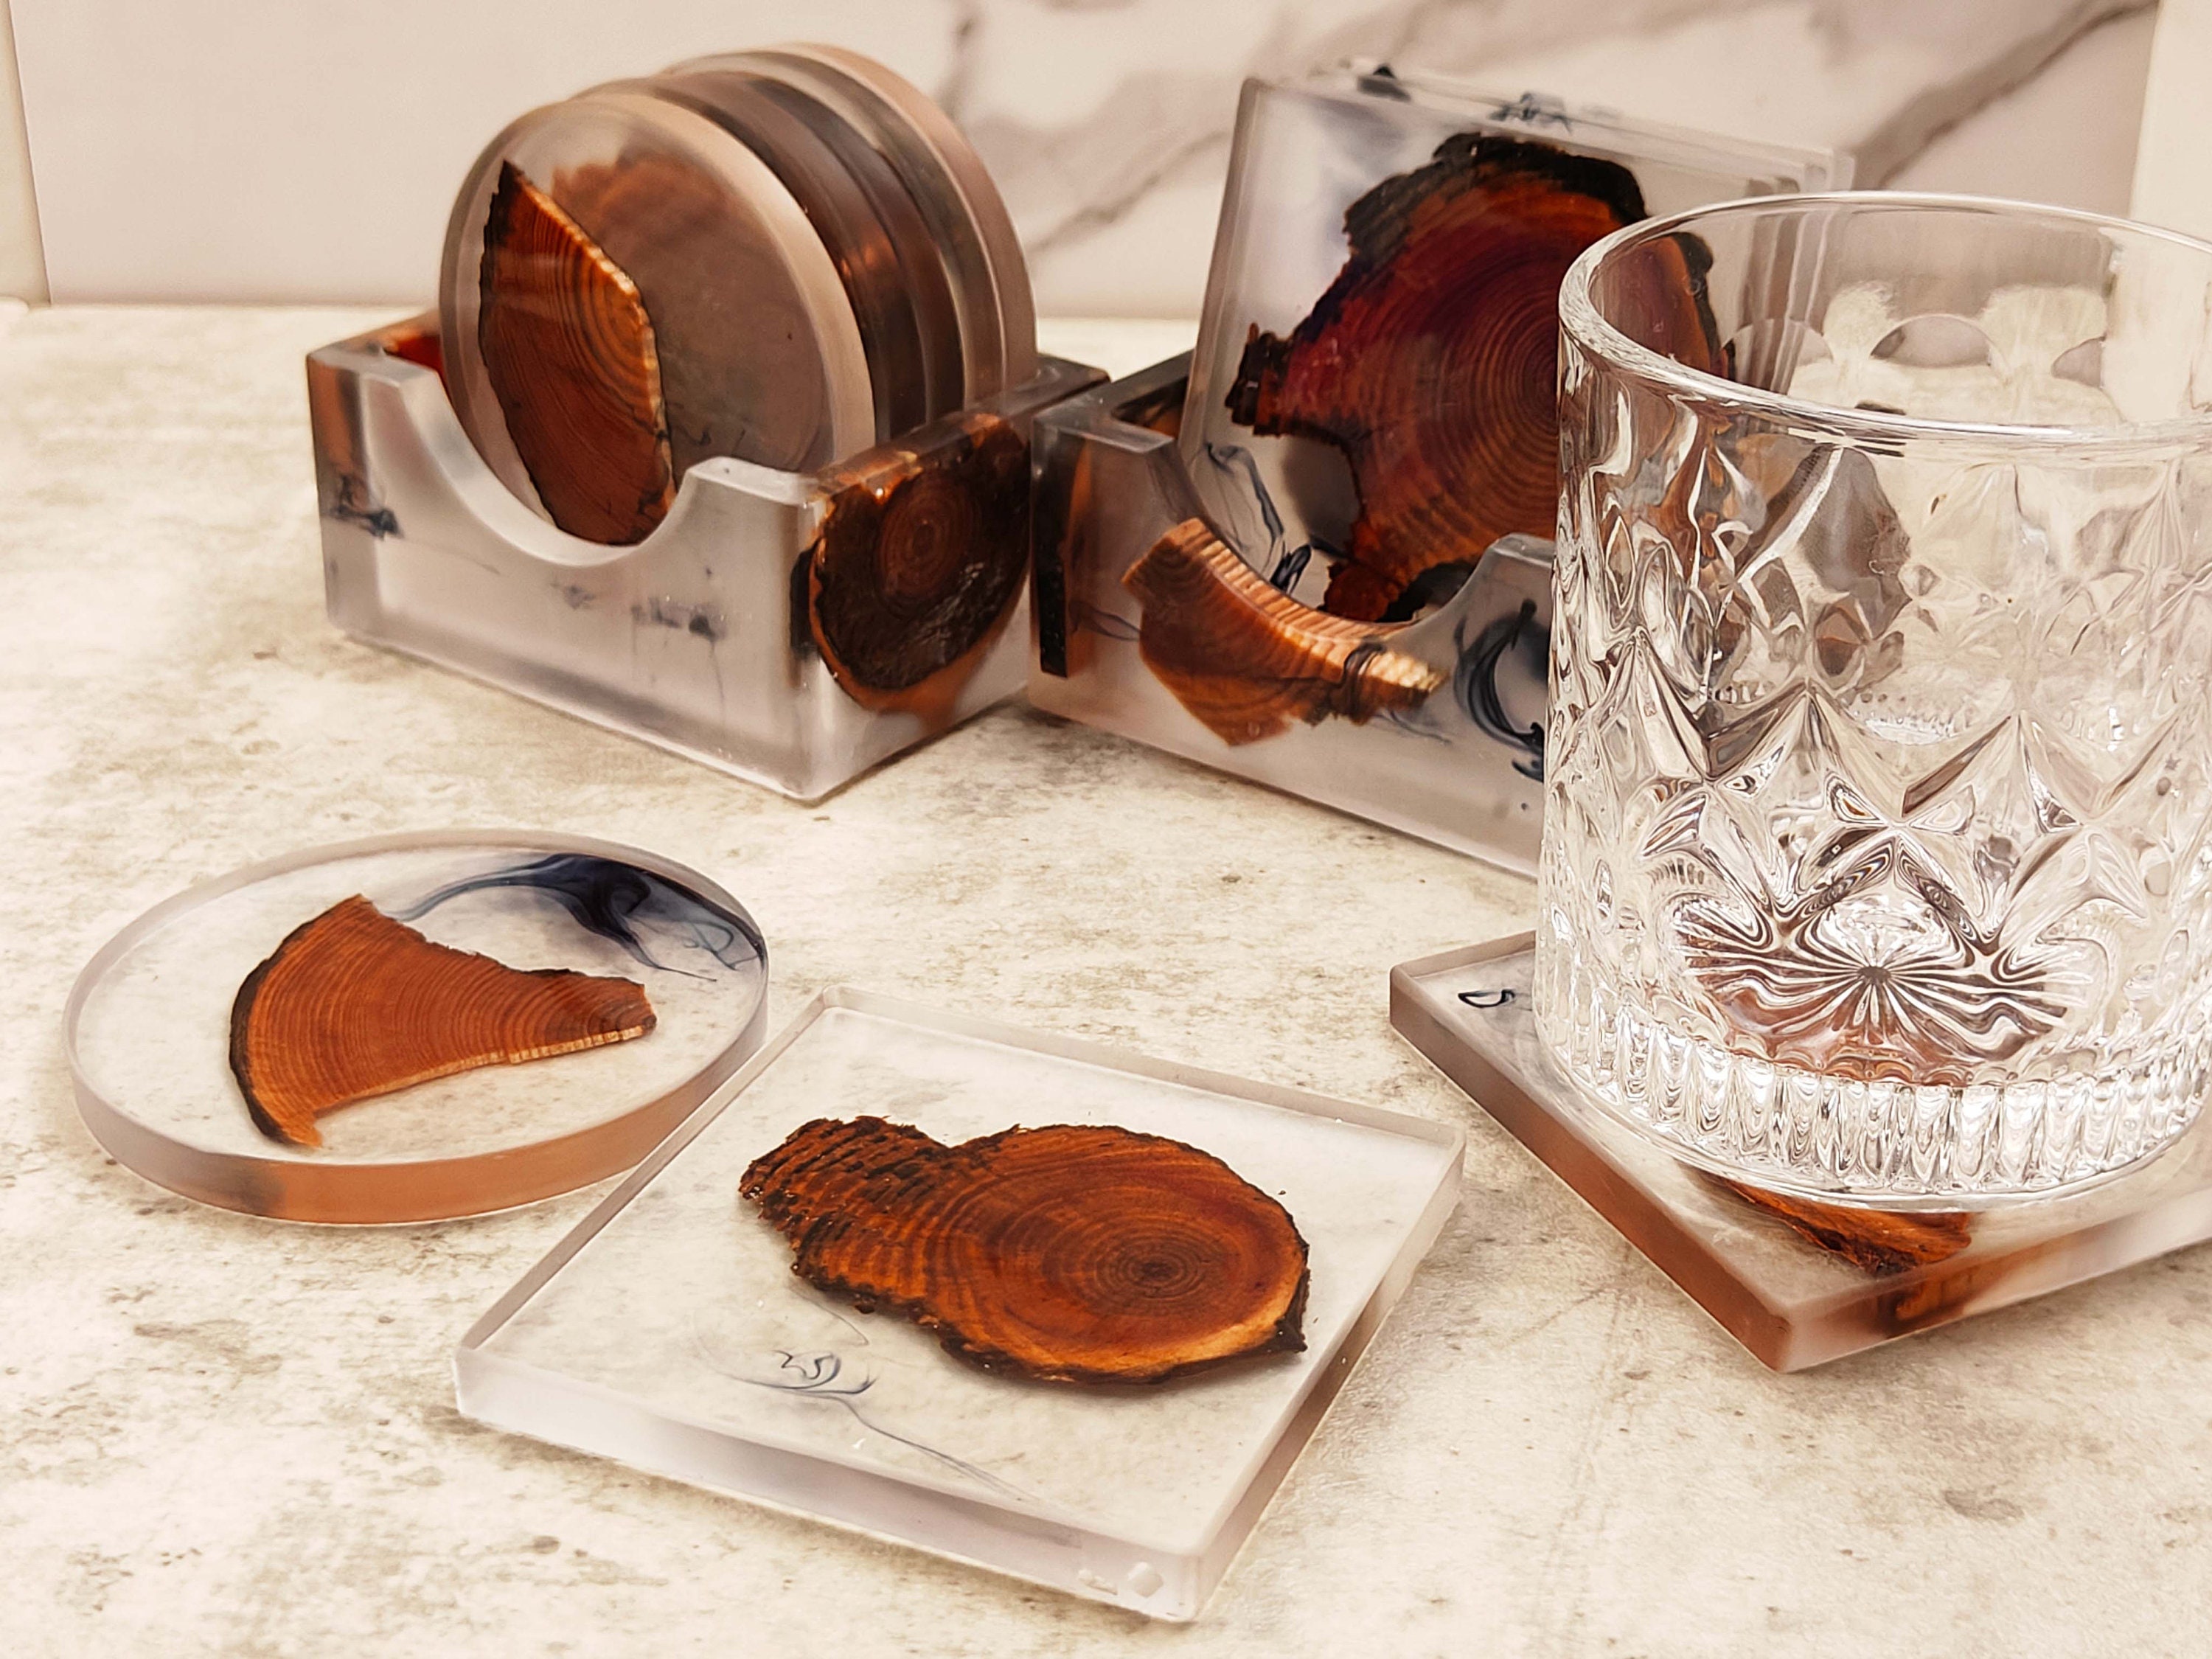 Stylish and Functional: Set of 6 Resin Coasters With Embedded Pine